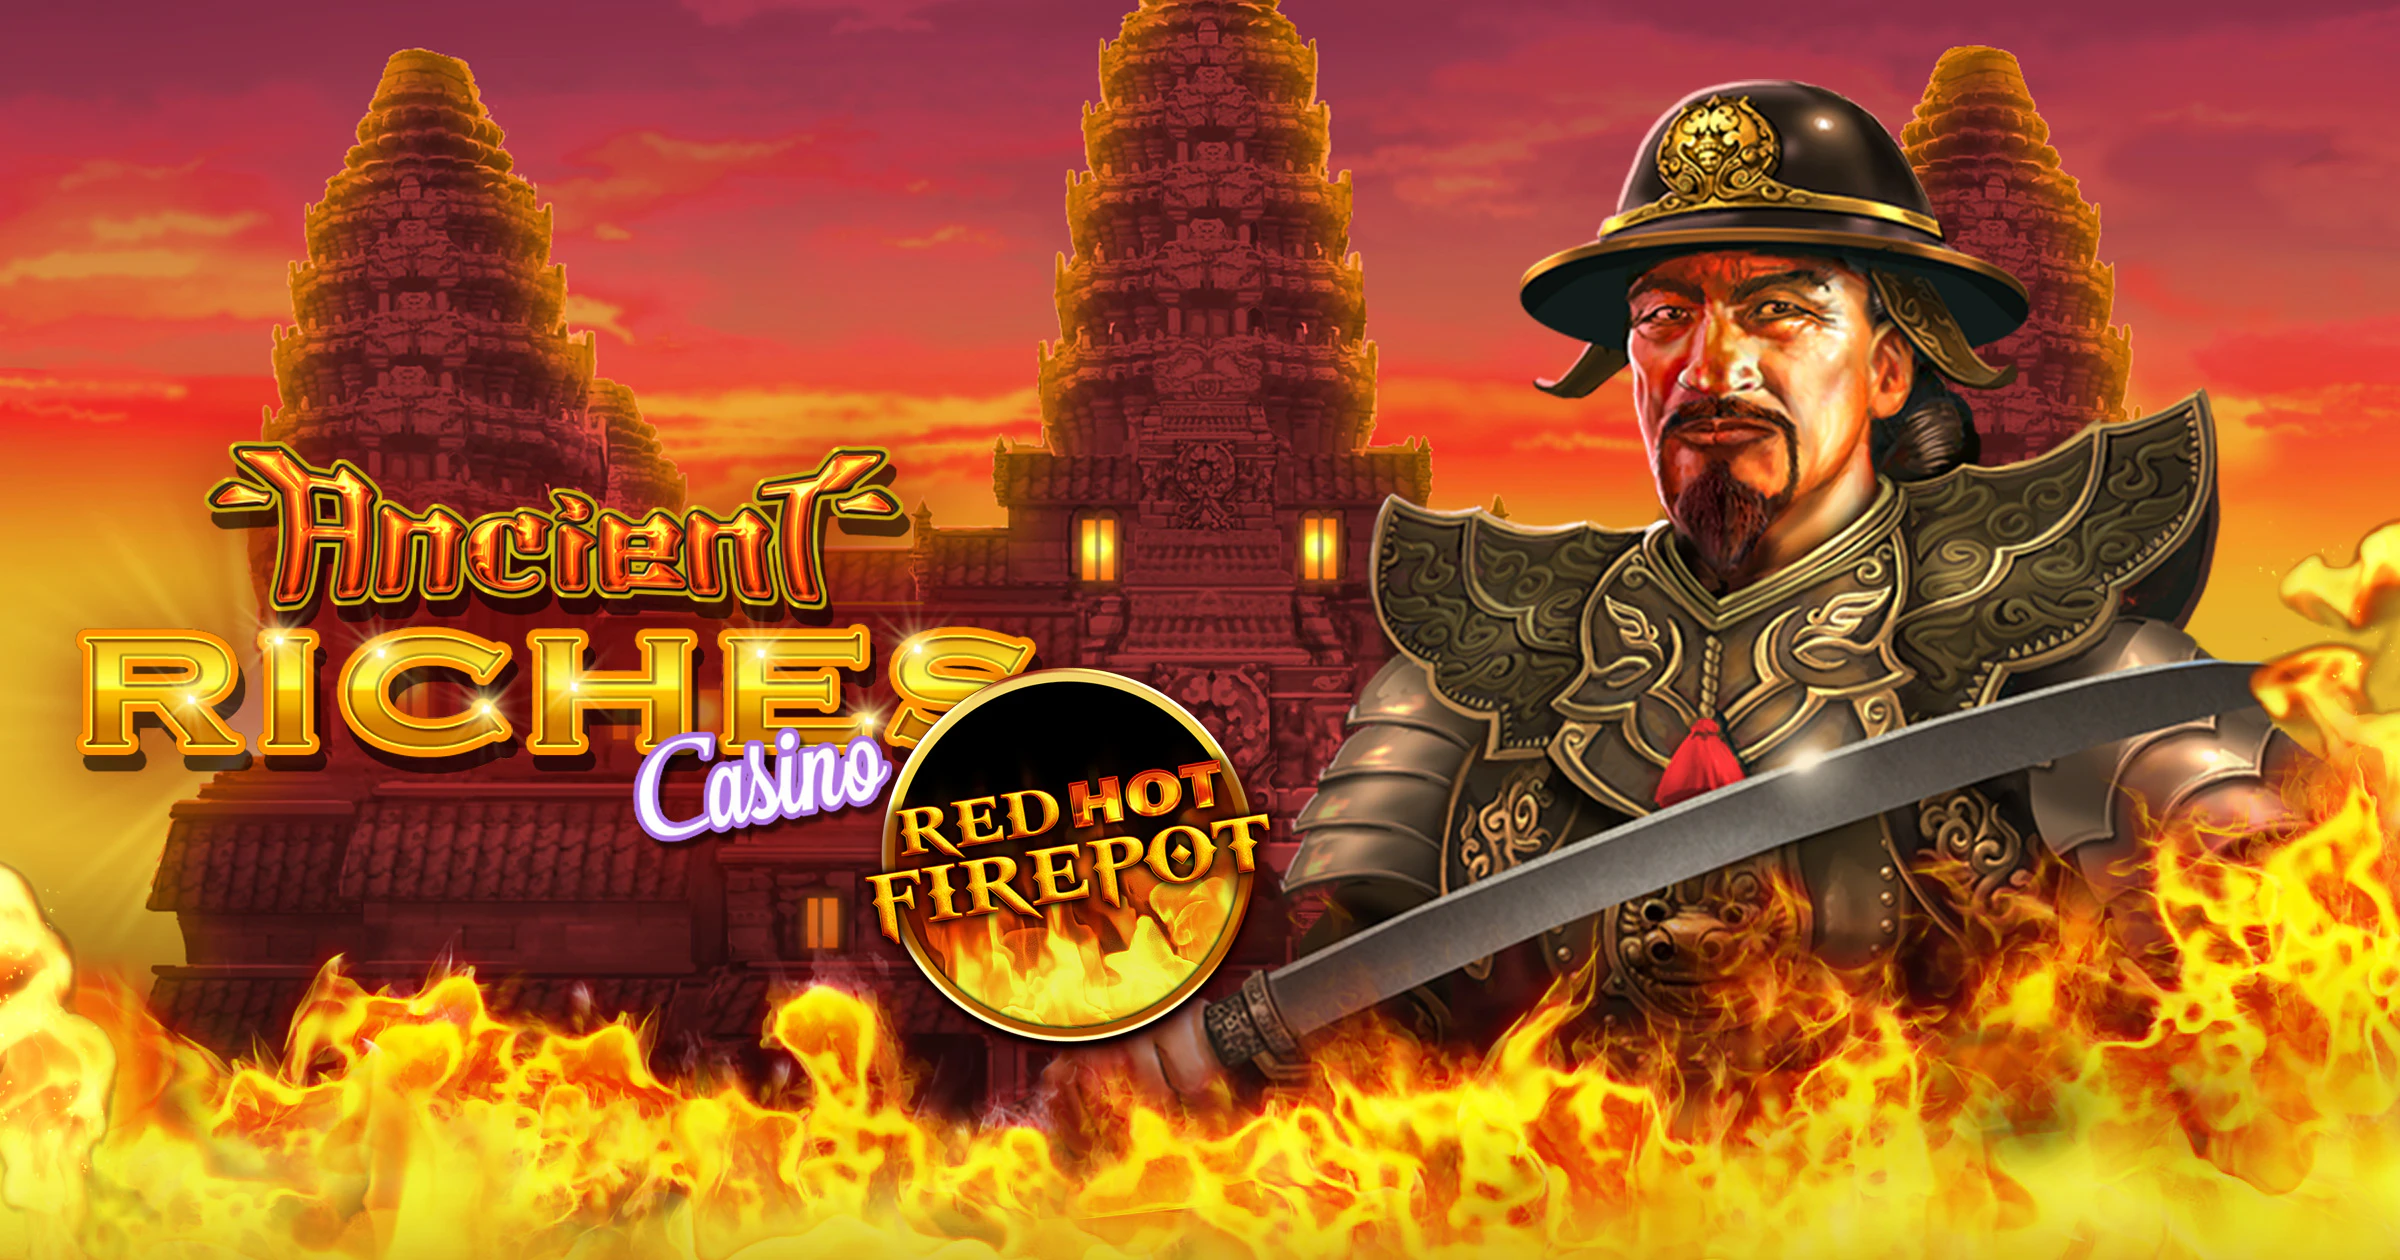 Ancient Riches Casino Red Hot Firepot